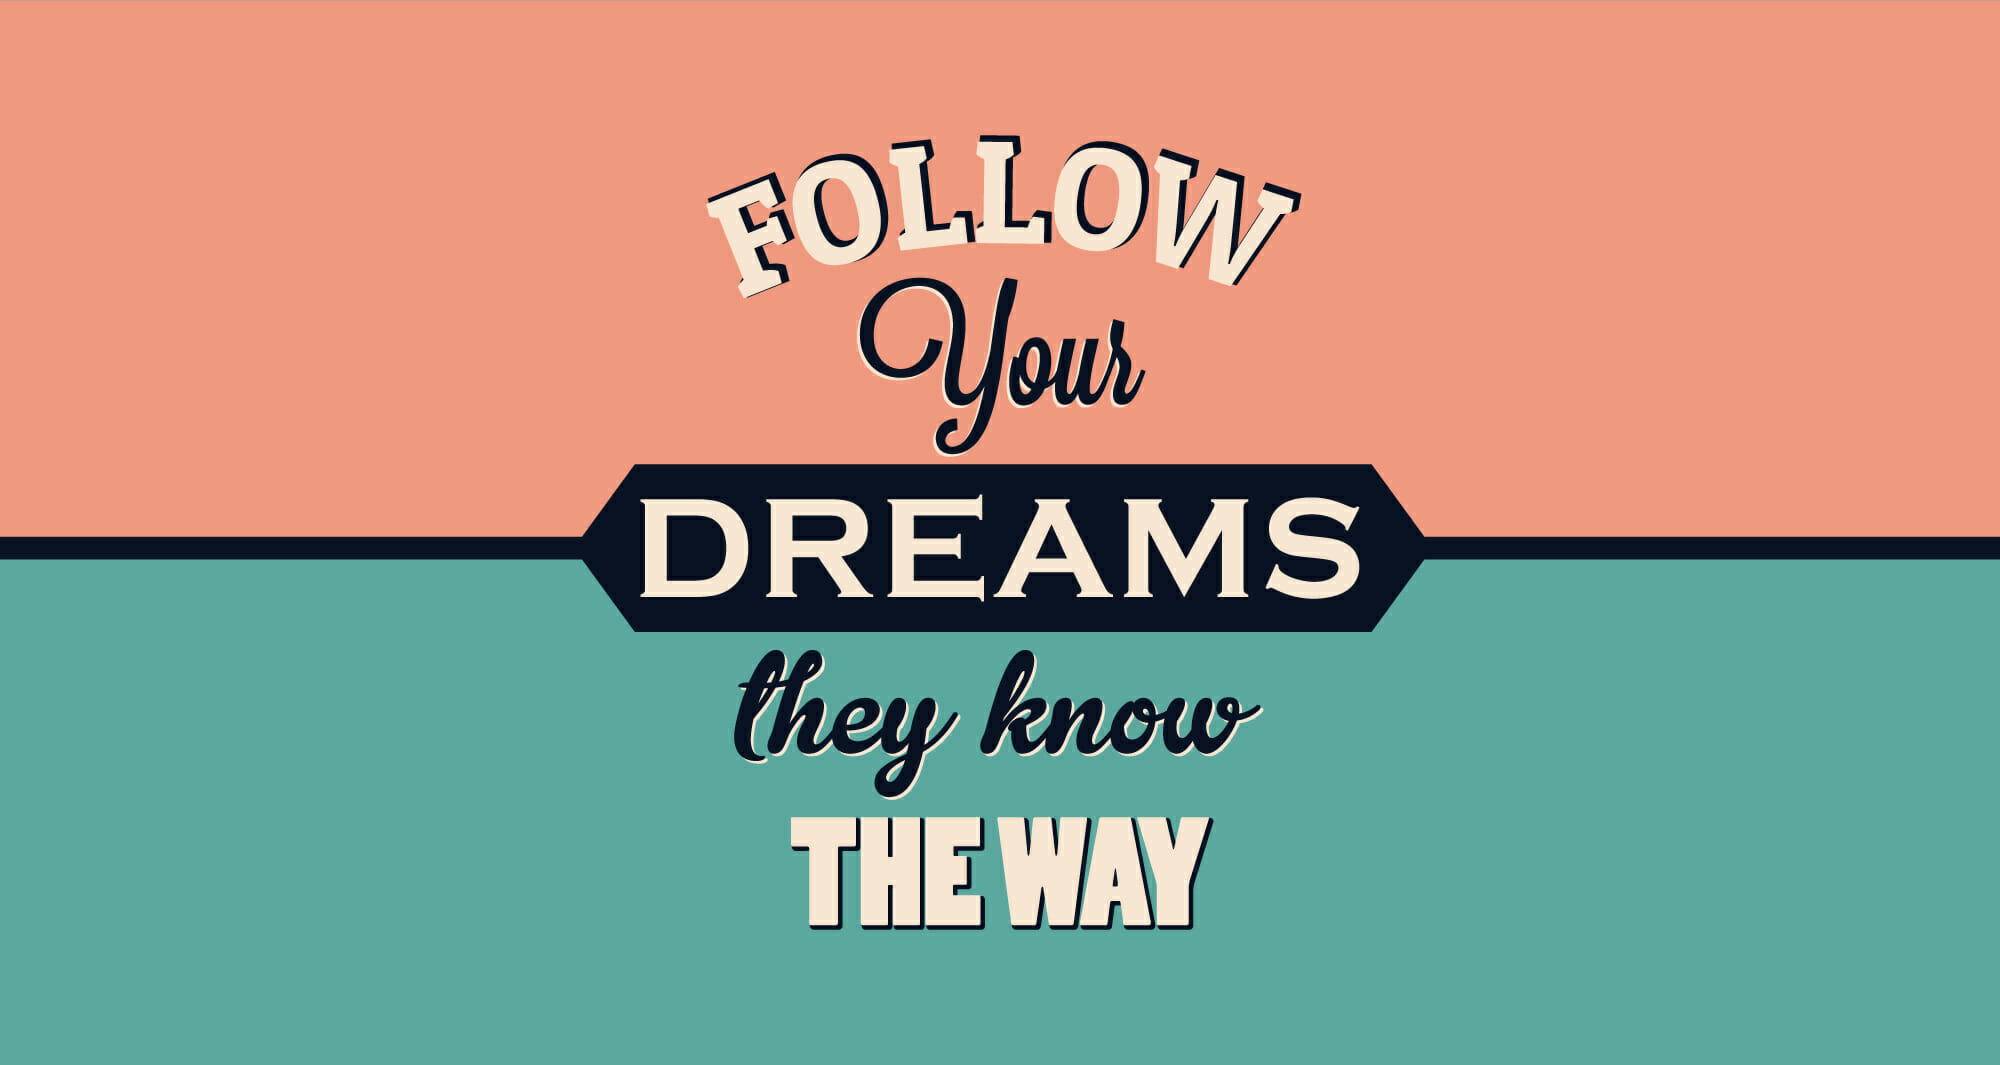 Follow Your Dreams they know The Way